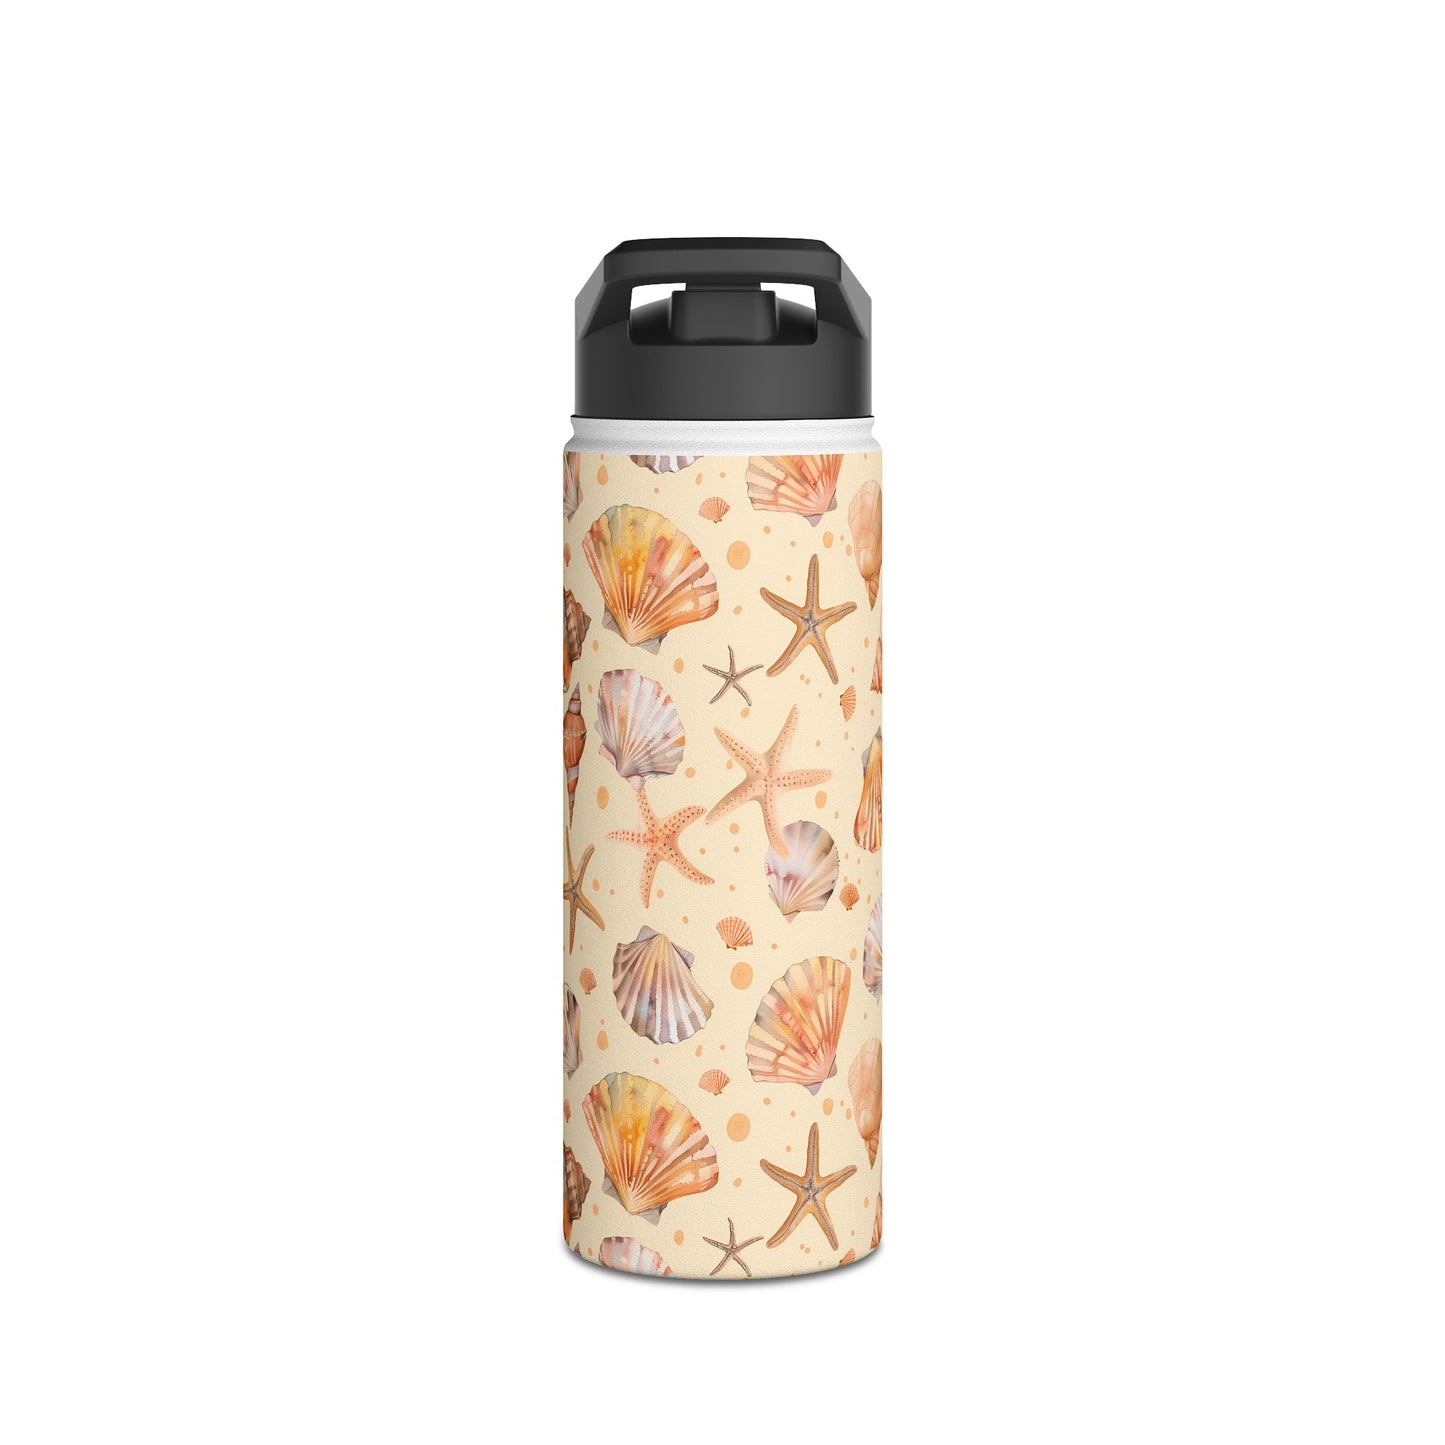 Stainless Steel Water Bottle Thermos, 18oz, Sand Seashells Starfish - Double Wall Insulation Keeps Drinks Hot or Cold